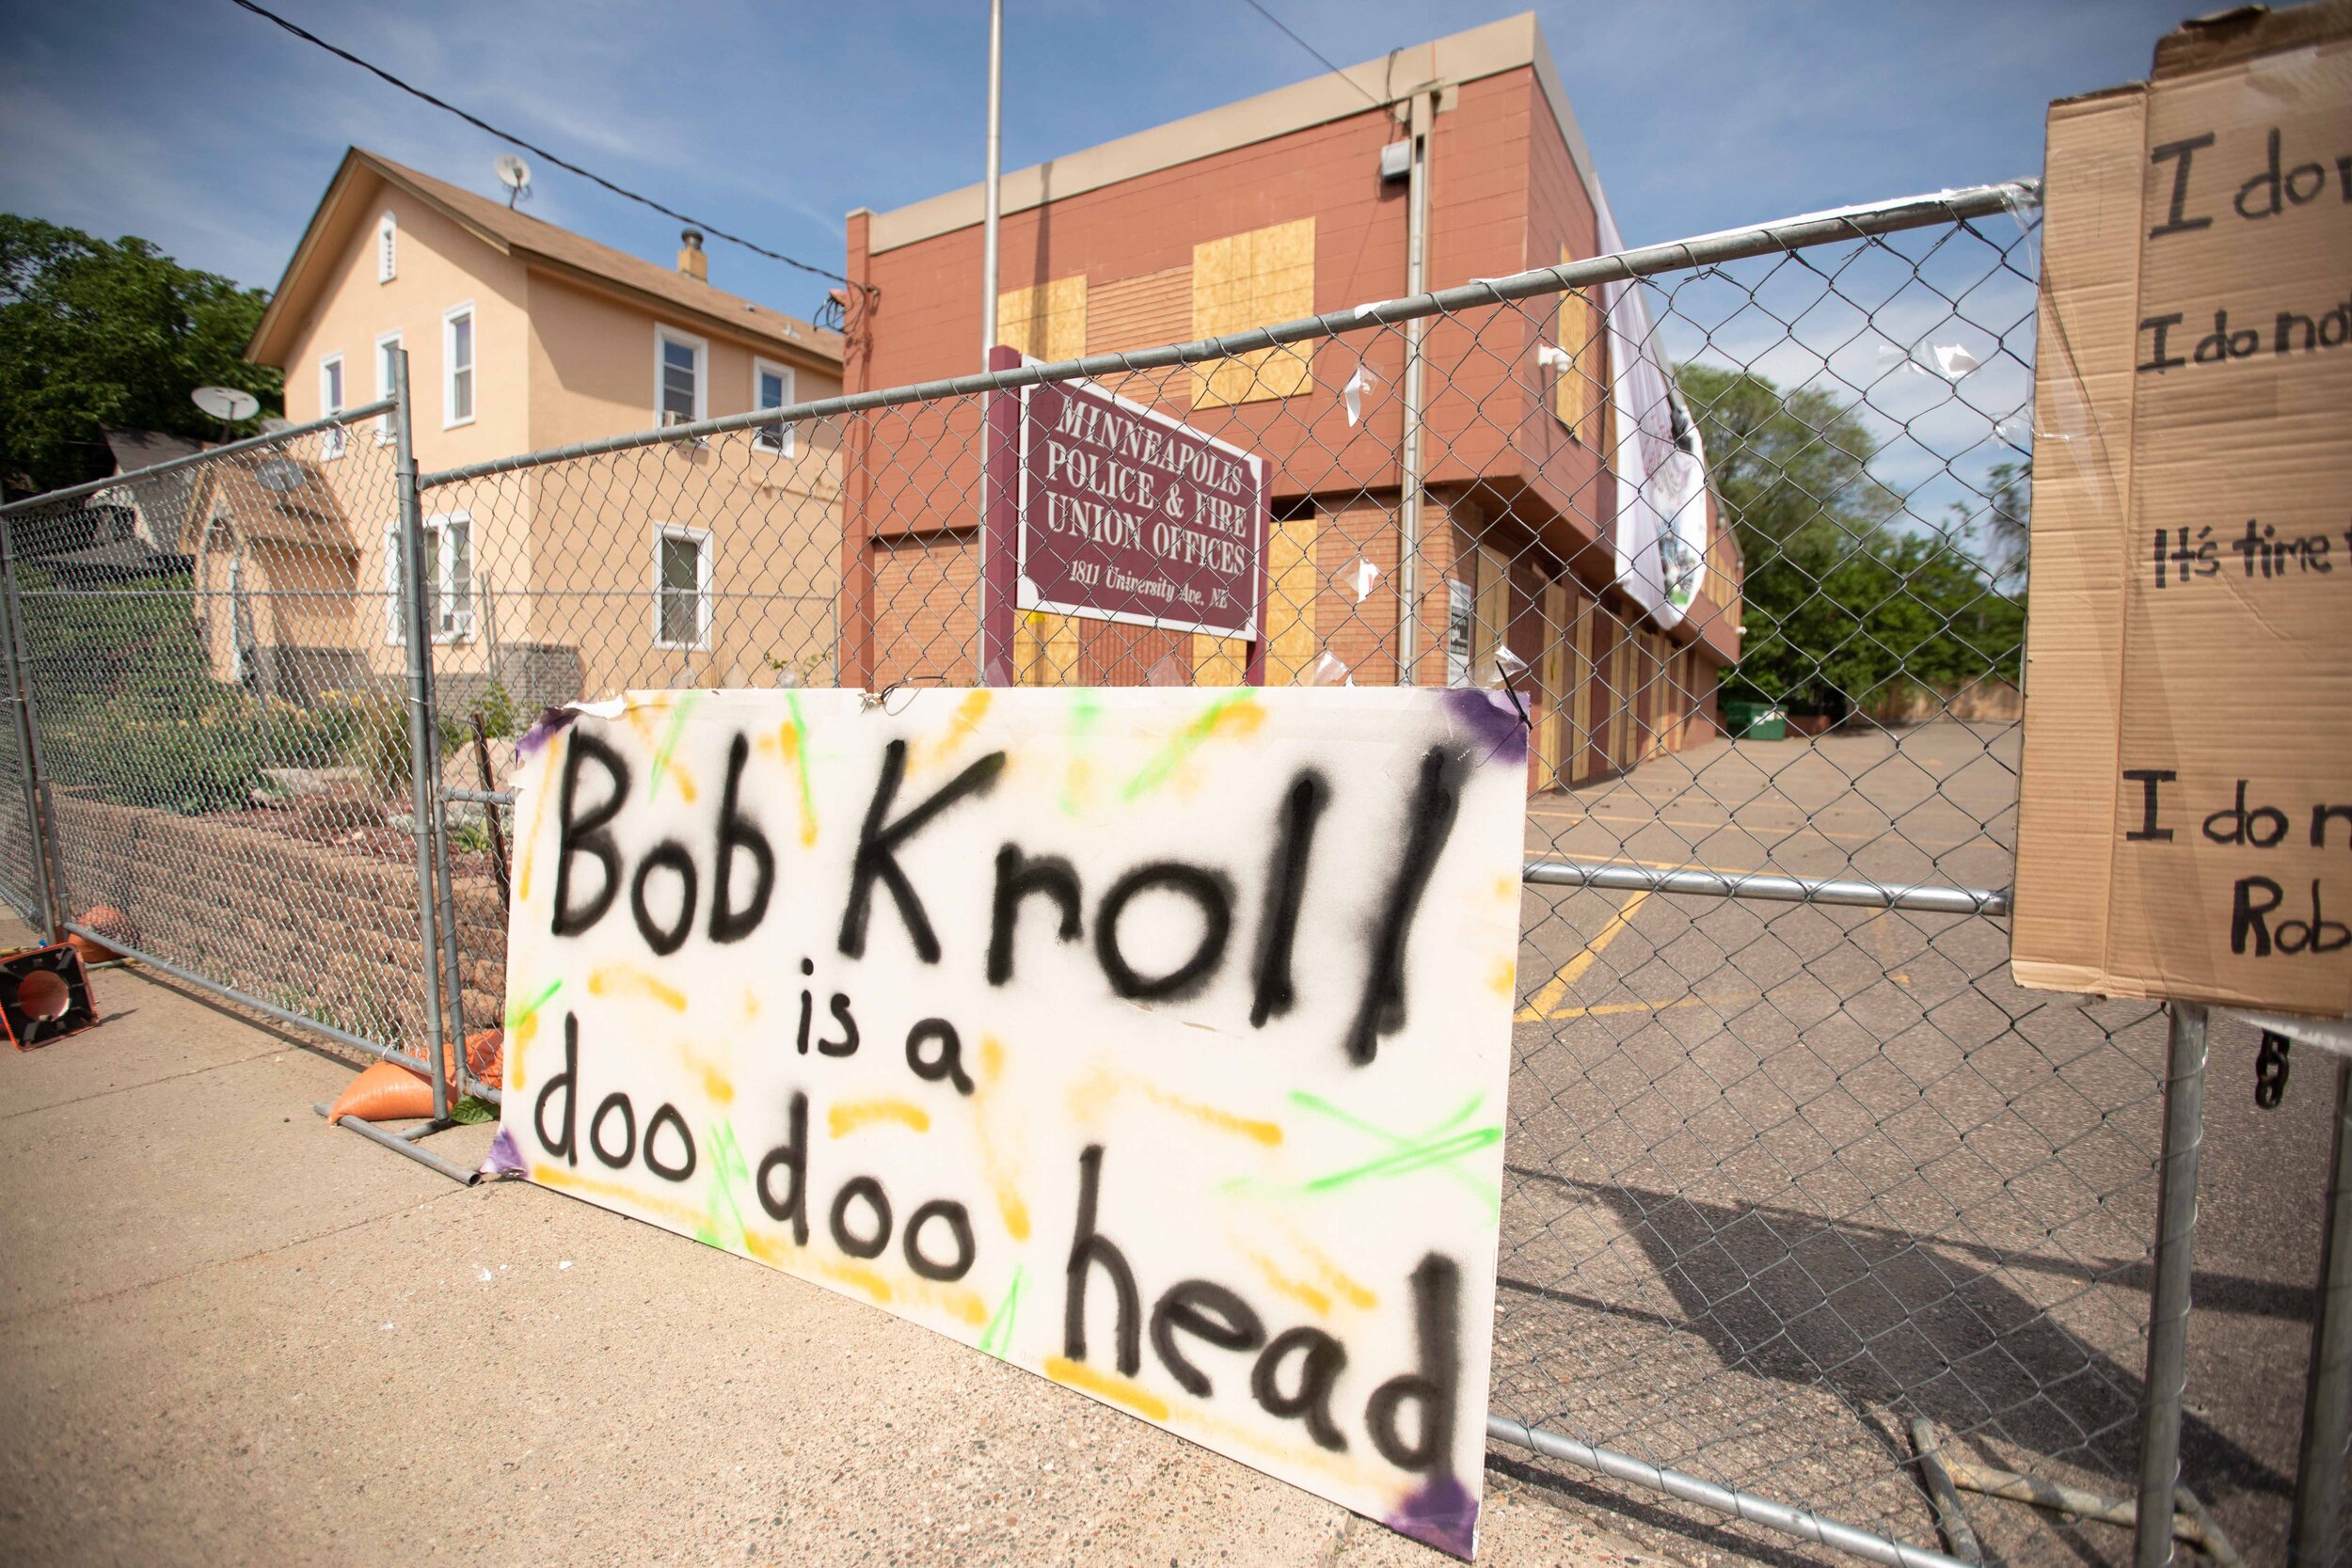  Covered with signs and a banner, a board calling Police Union President Bob Kroll a "doo doo head," was put on the fence around the Minneapolis Police and Fire Union offices in Minneapolis, Minnesota on Jun 6, 2020. 